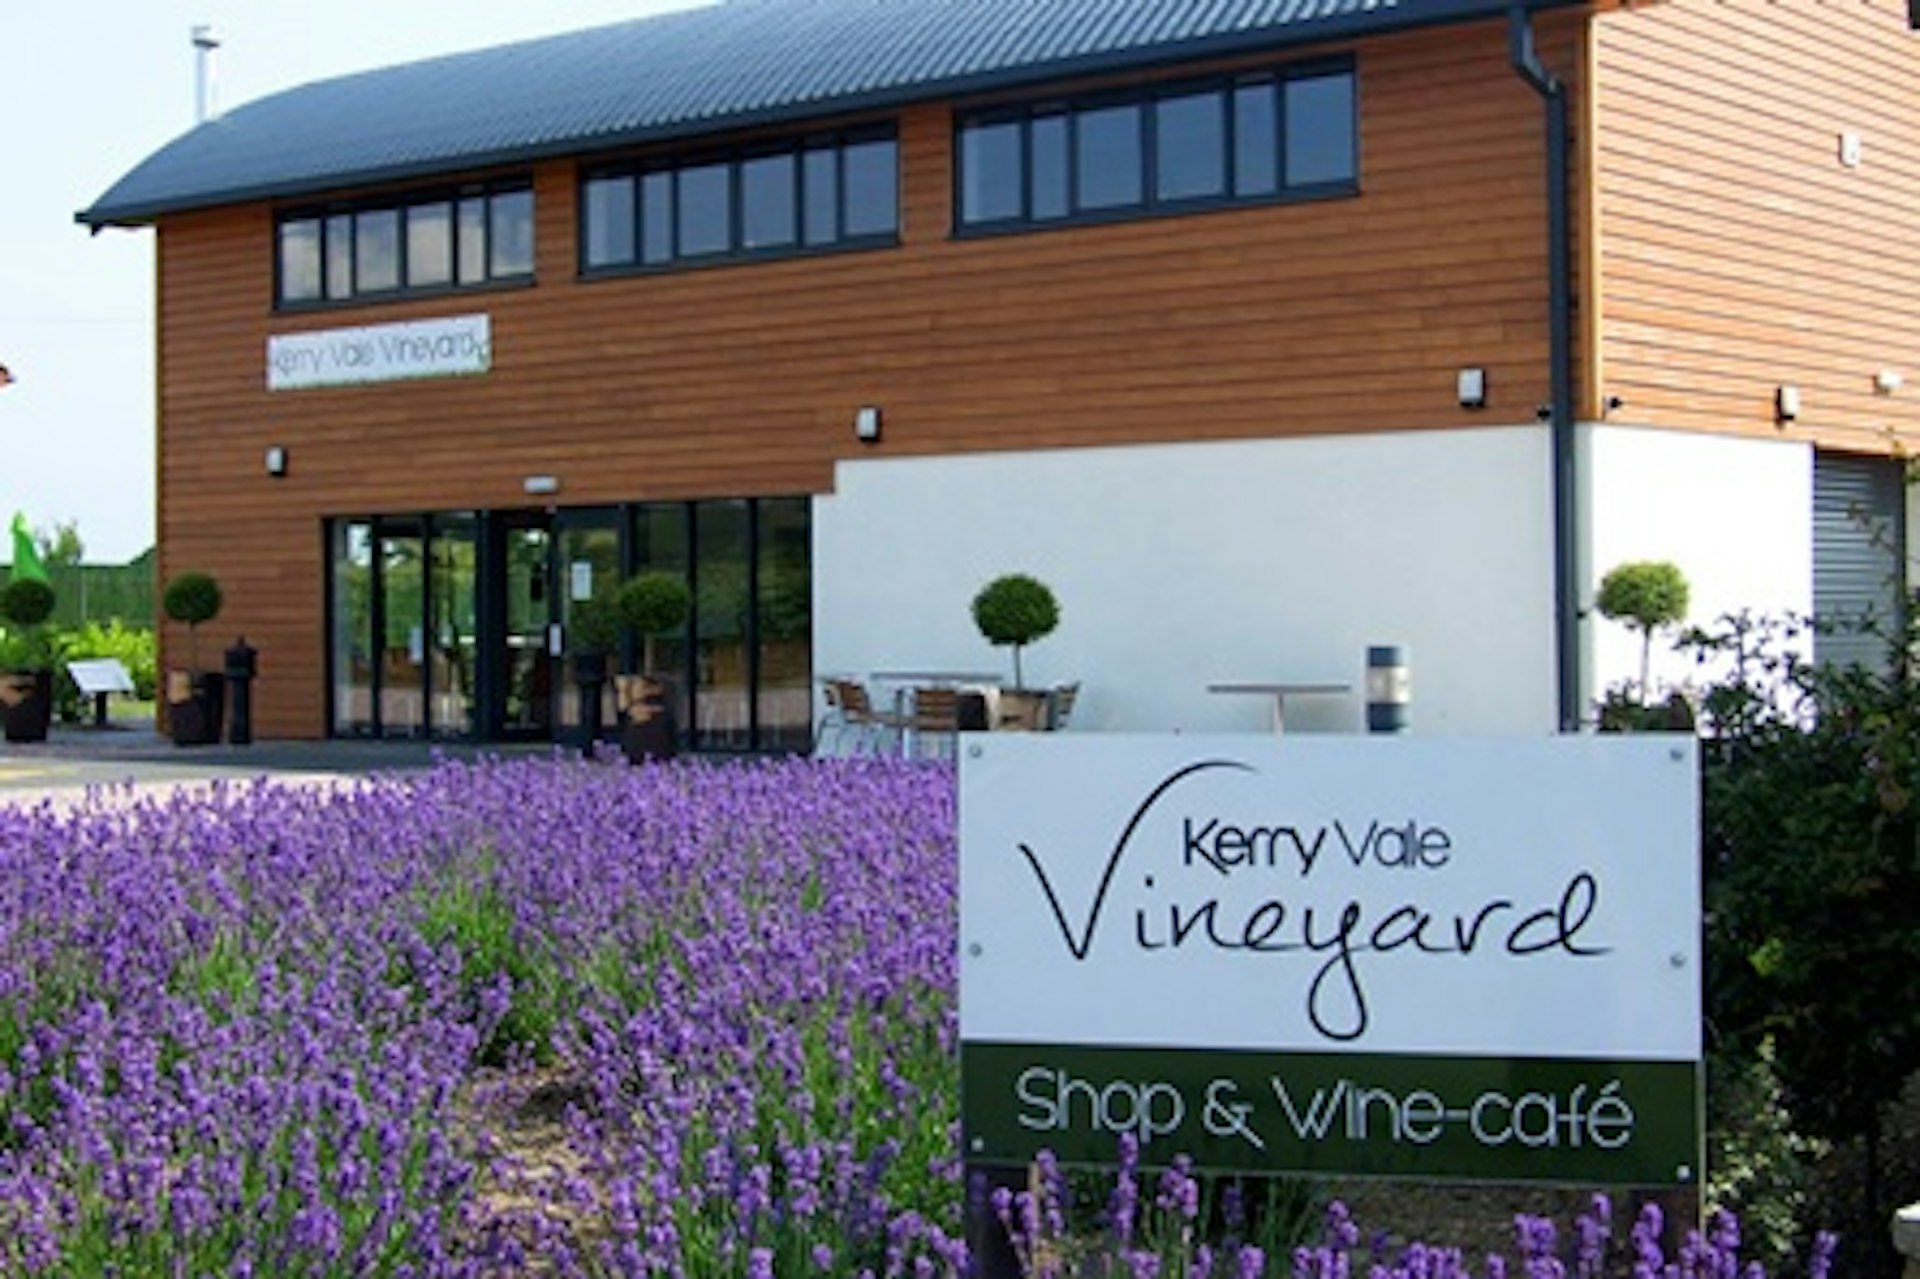 Vineyard Tour and Tasting with Cheese and Wine for Two at Kerry Vale Vineyard 2